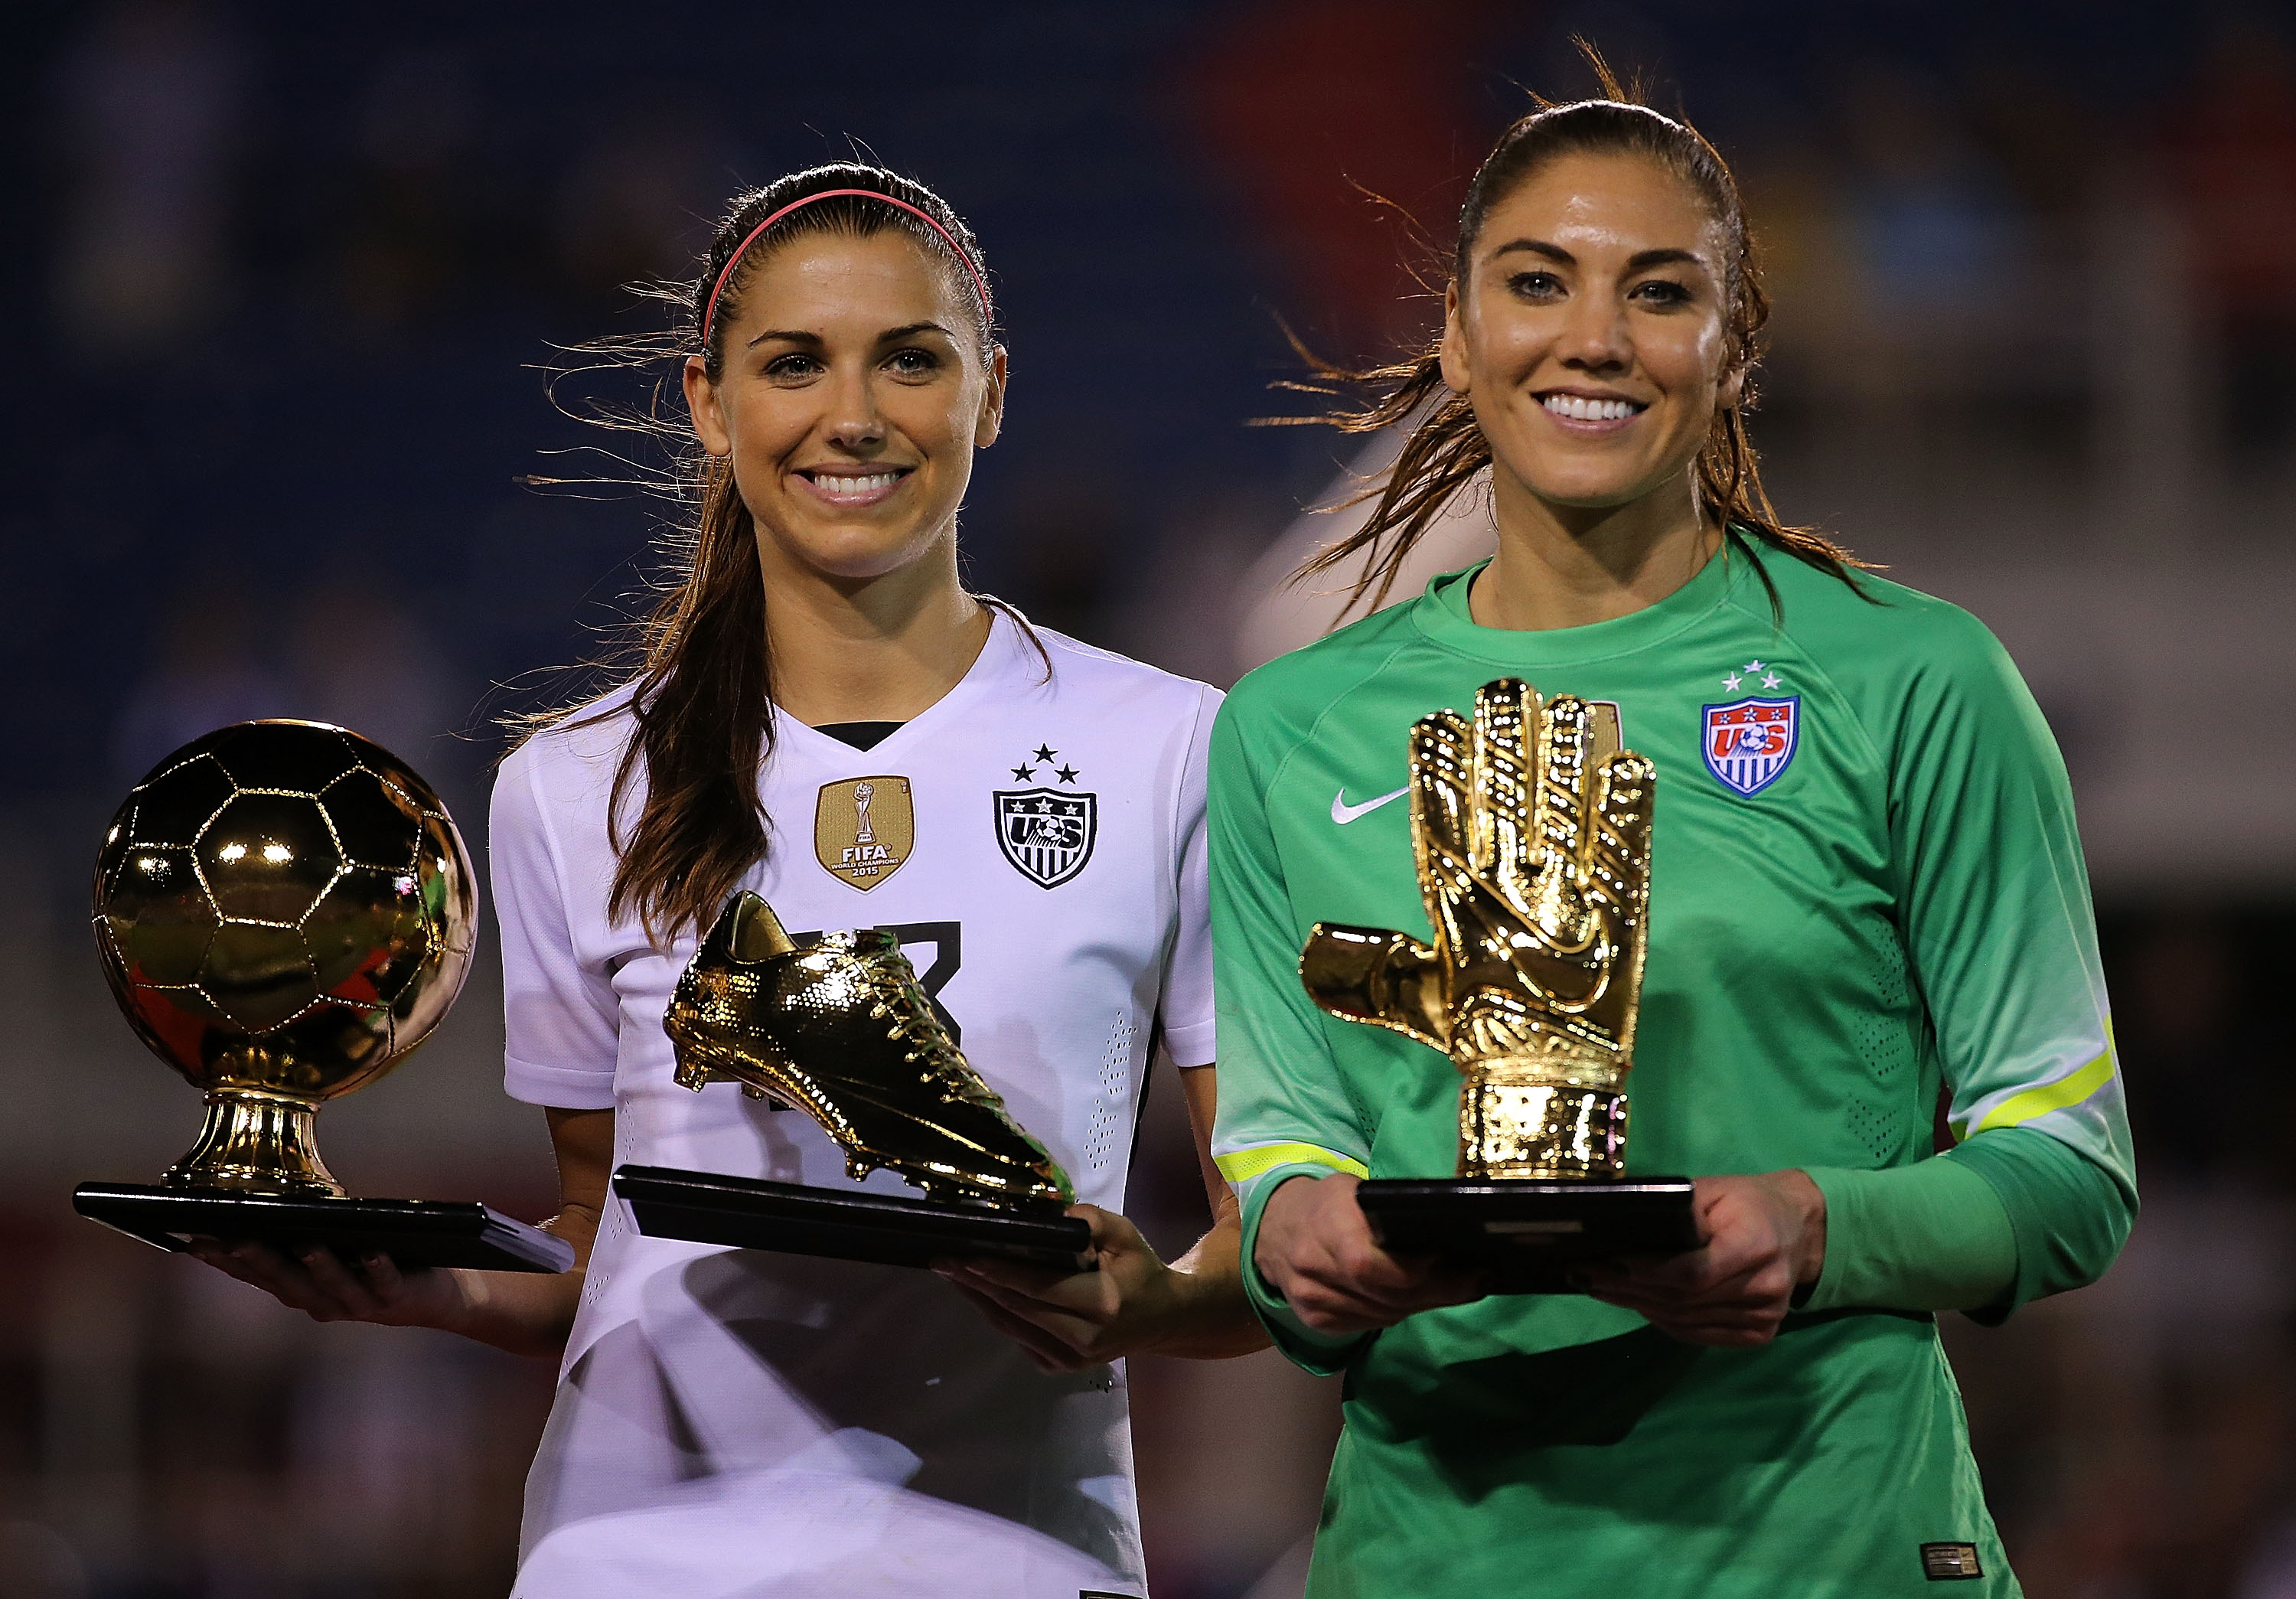 Alex Morgan and Hope Solo by ElSexteteFCB on DeviantArt